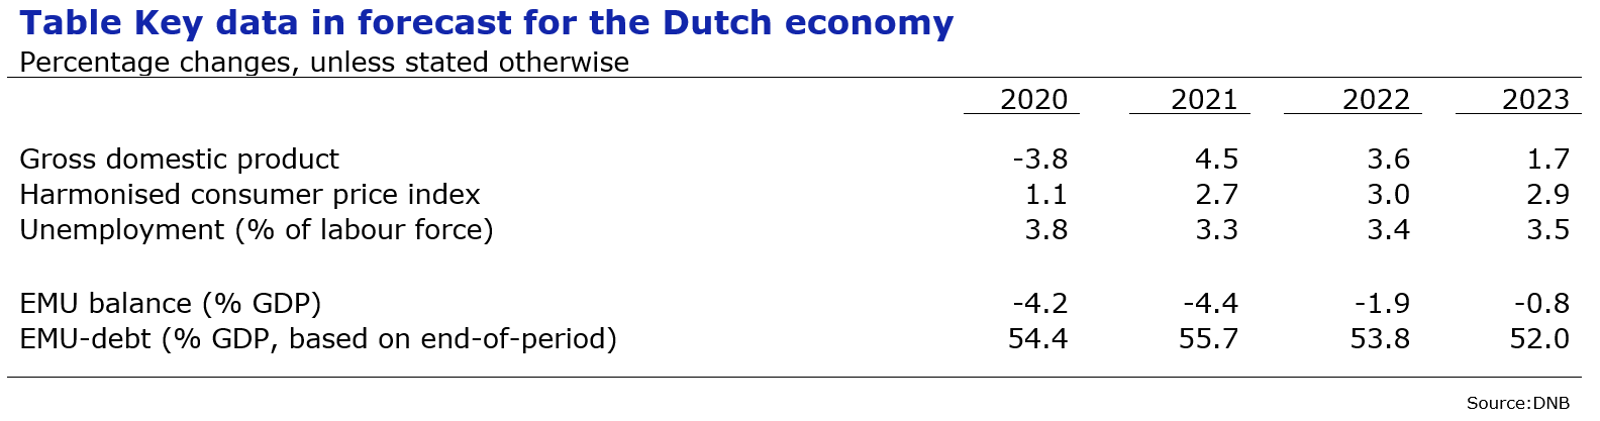 Table Key data in forecast for the Dutch economy